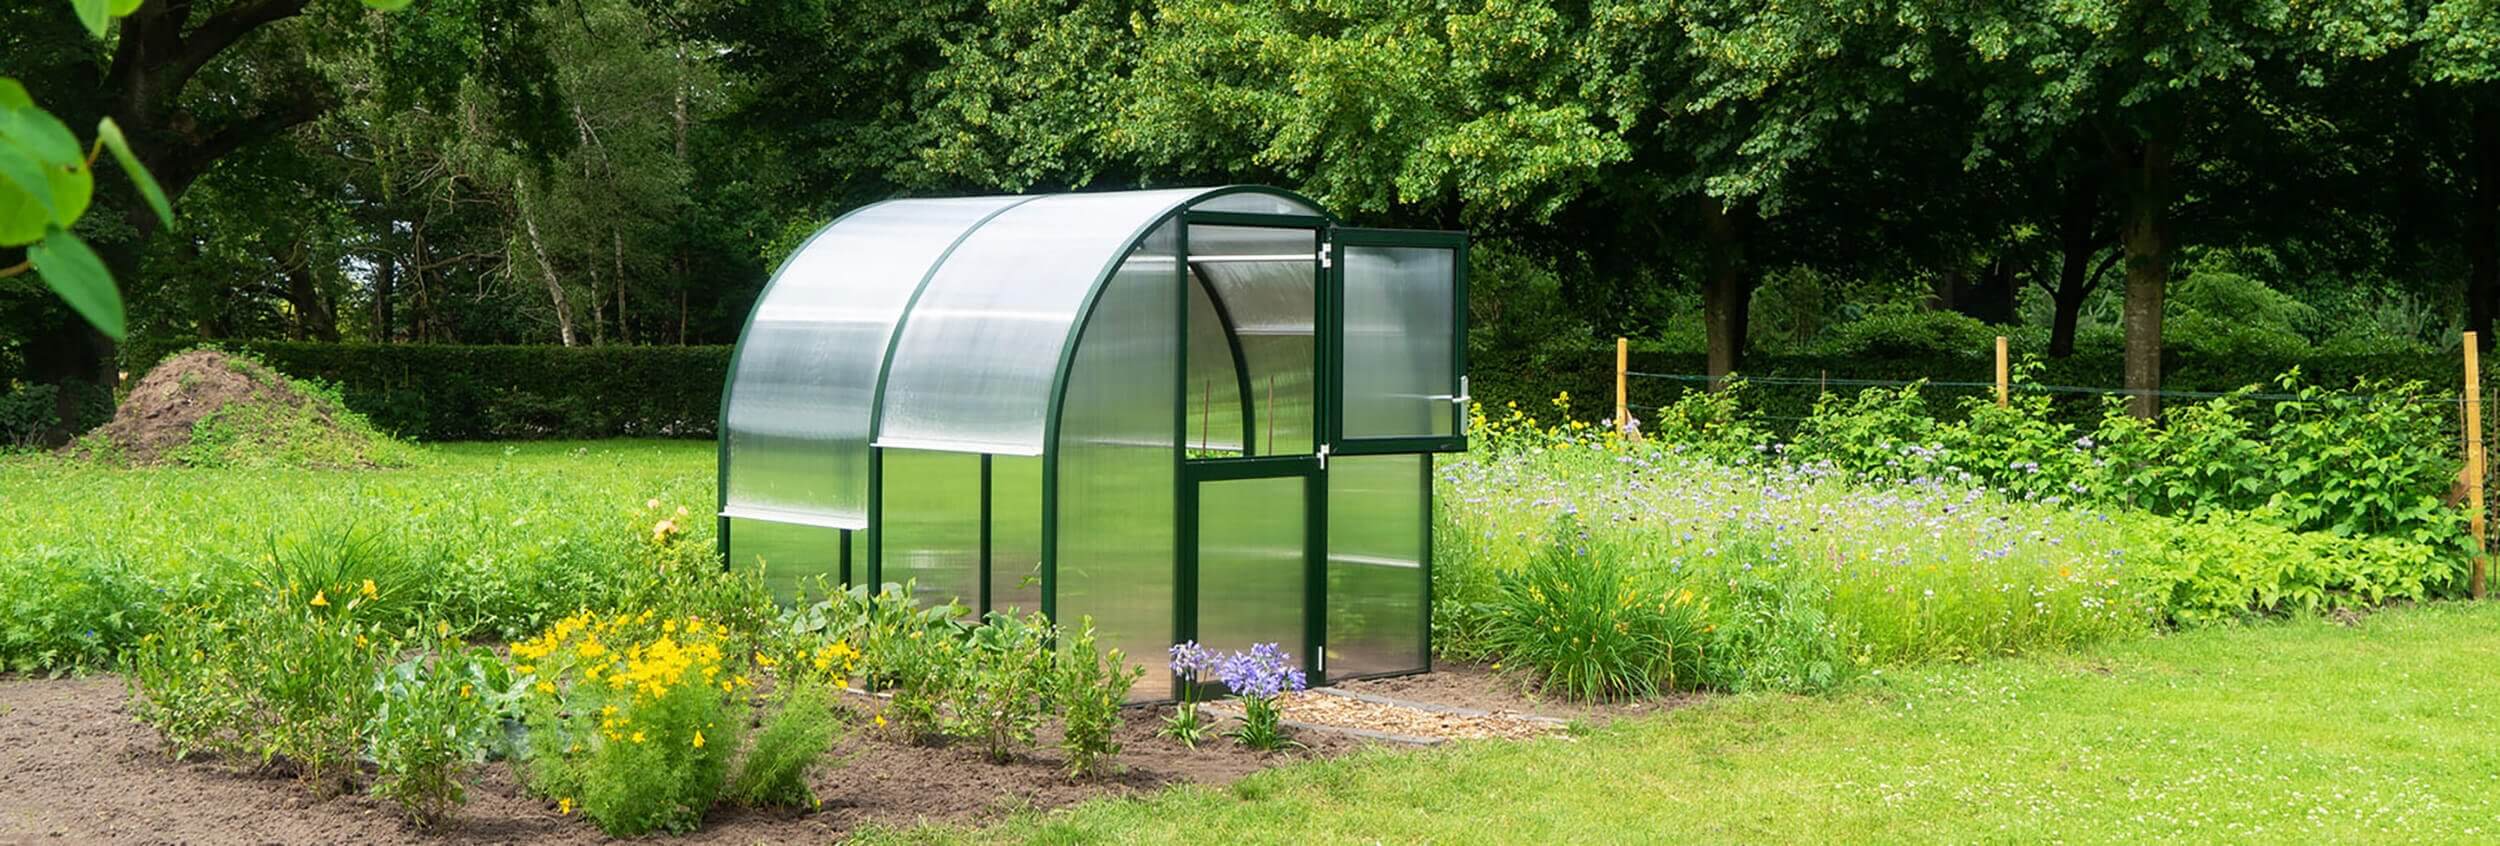 Small Greenhouse in the garden